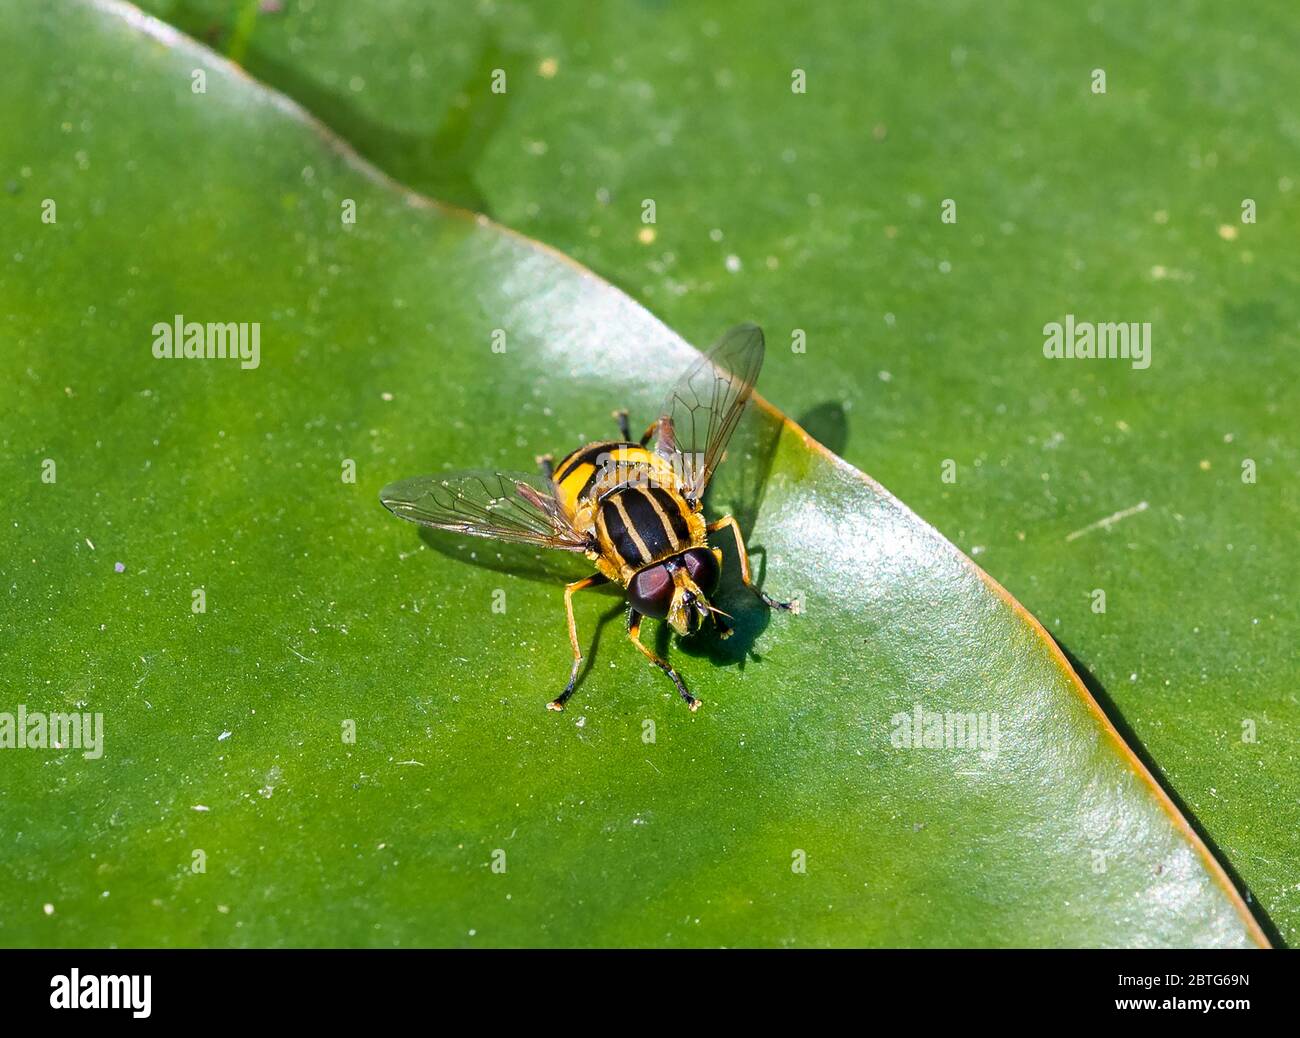 Close up of a hoverfly or also called syrphid fly or flower fly resting on the leaf of a water lily by a pond in a garden in Southern England, UK Stock Photo